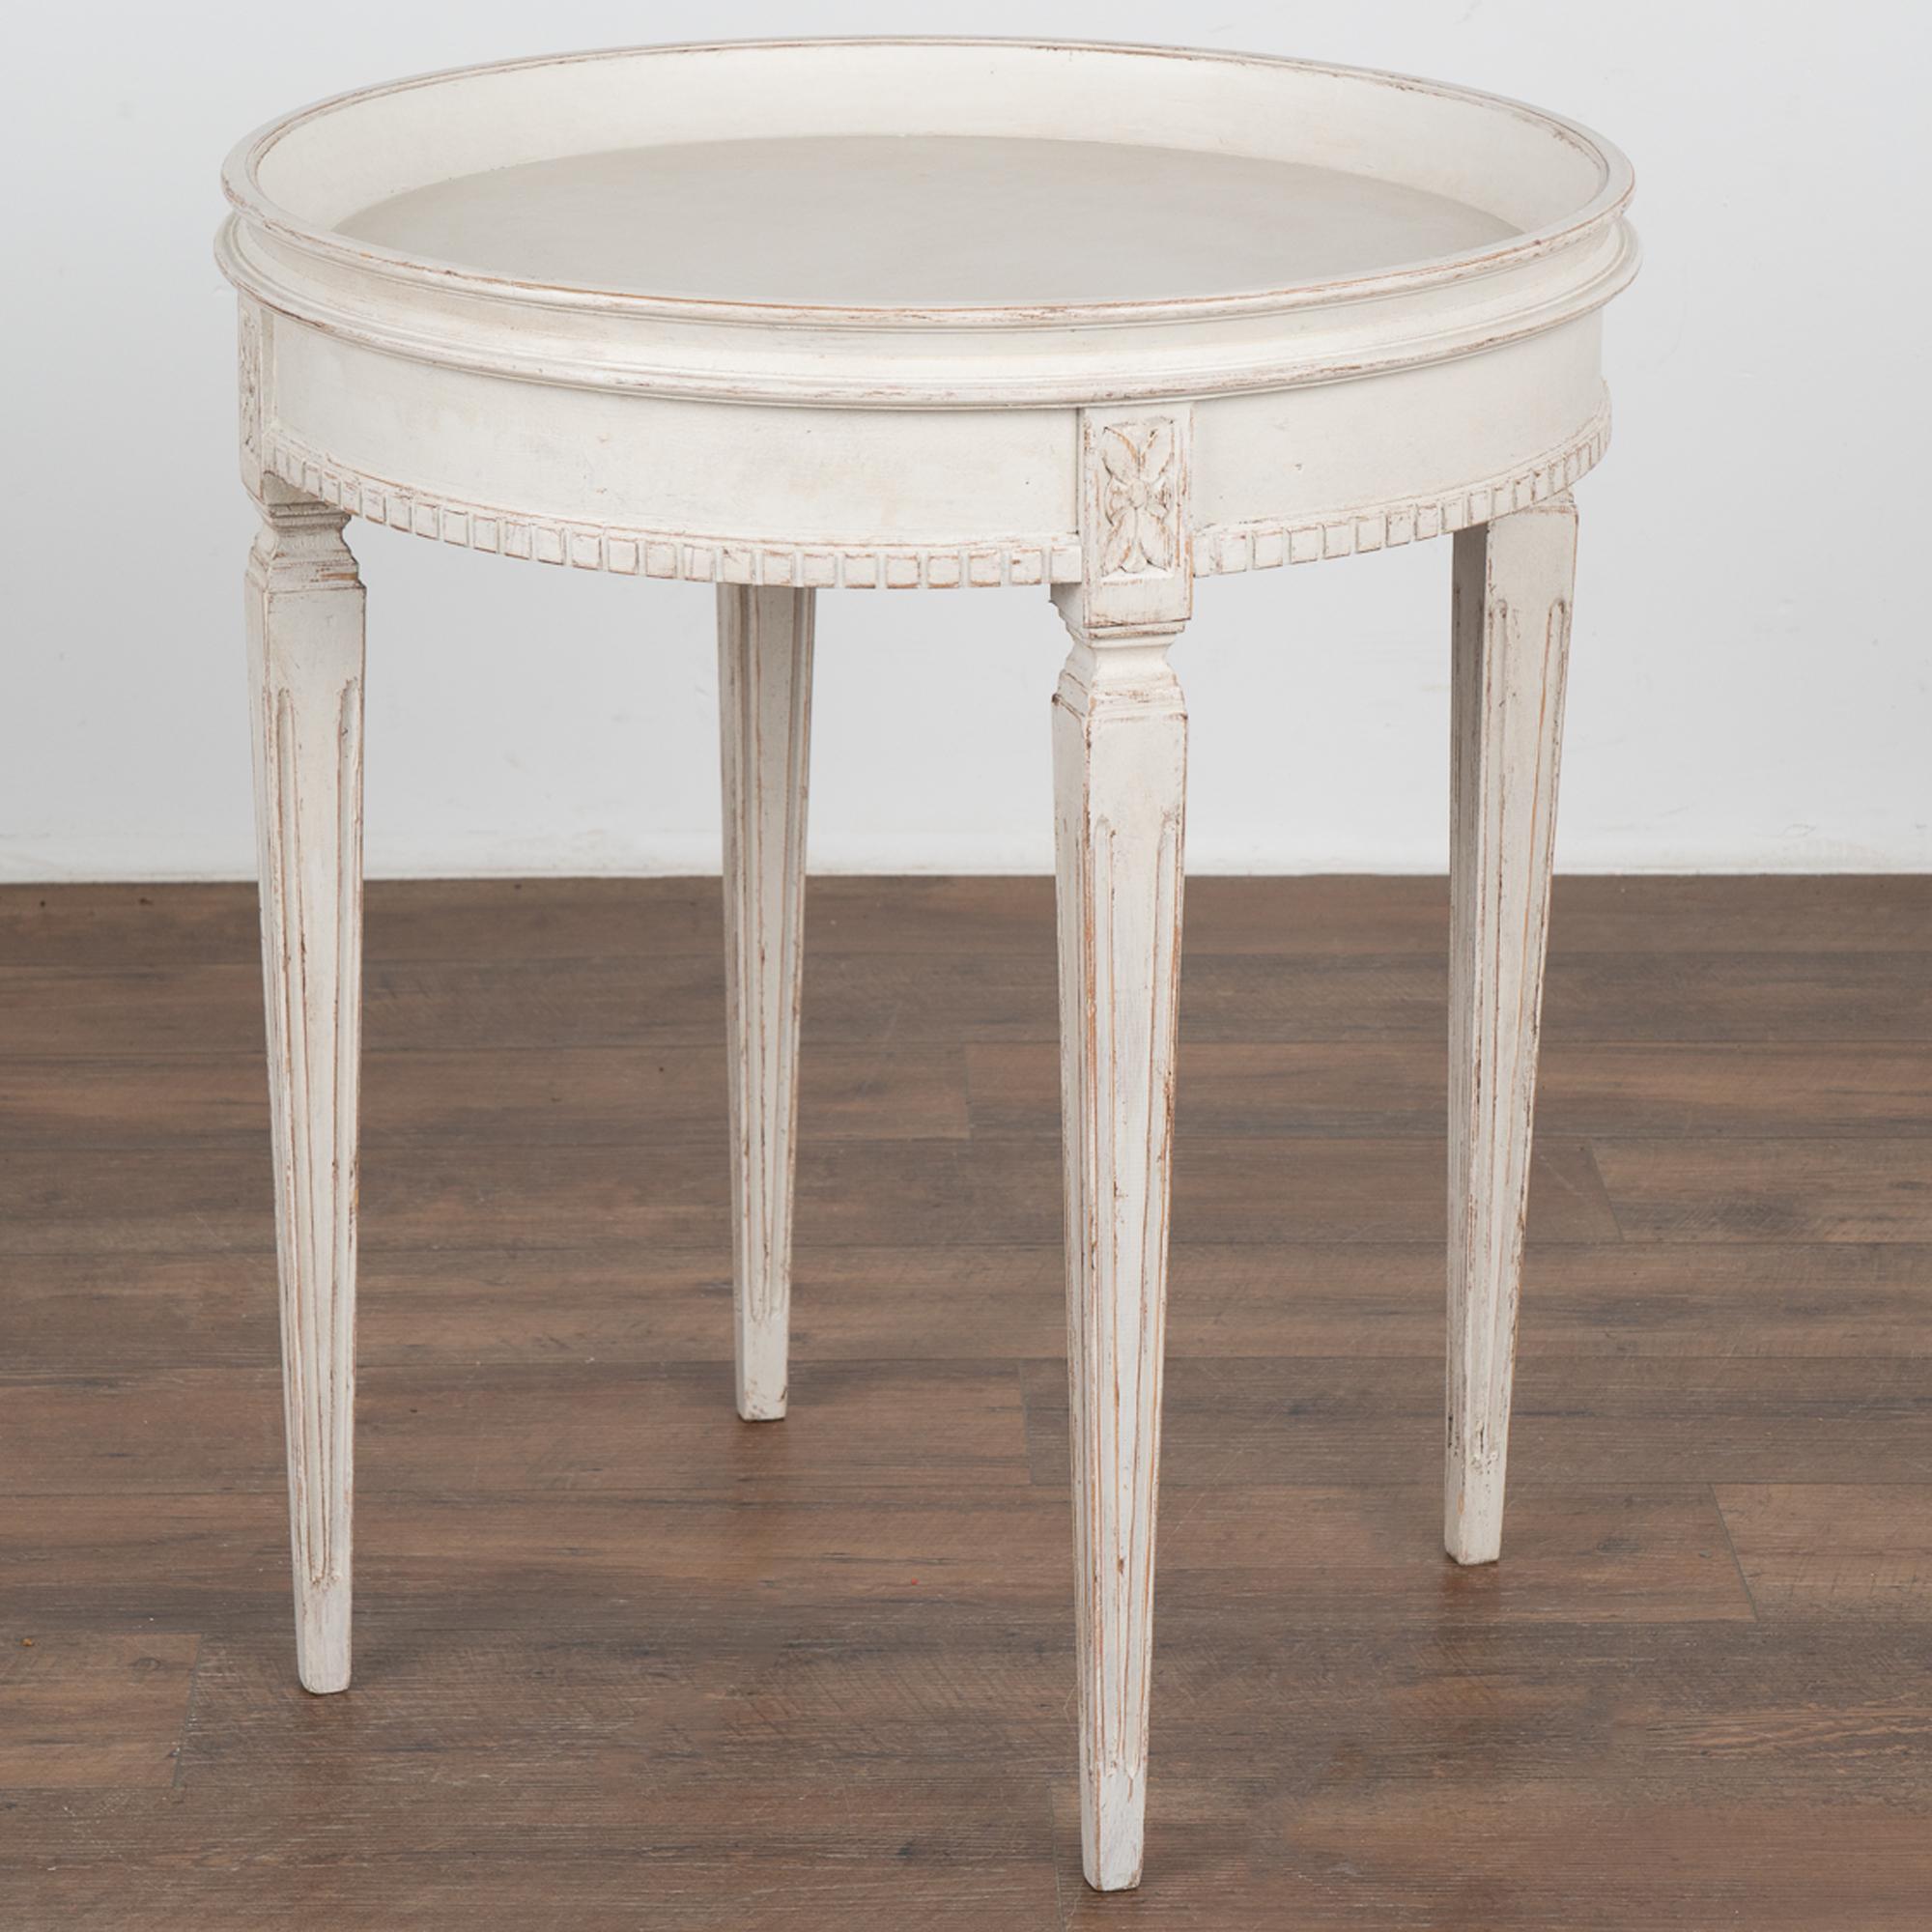 Lovely round Swedish Gustavian side table with carved dentil molding and tapered fluted legs topped by carved floral accents.
Newer, professionally applied layered white painted finish which is lightly distressed, adds to the charm of this graceful